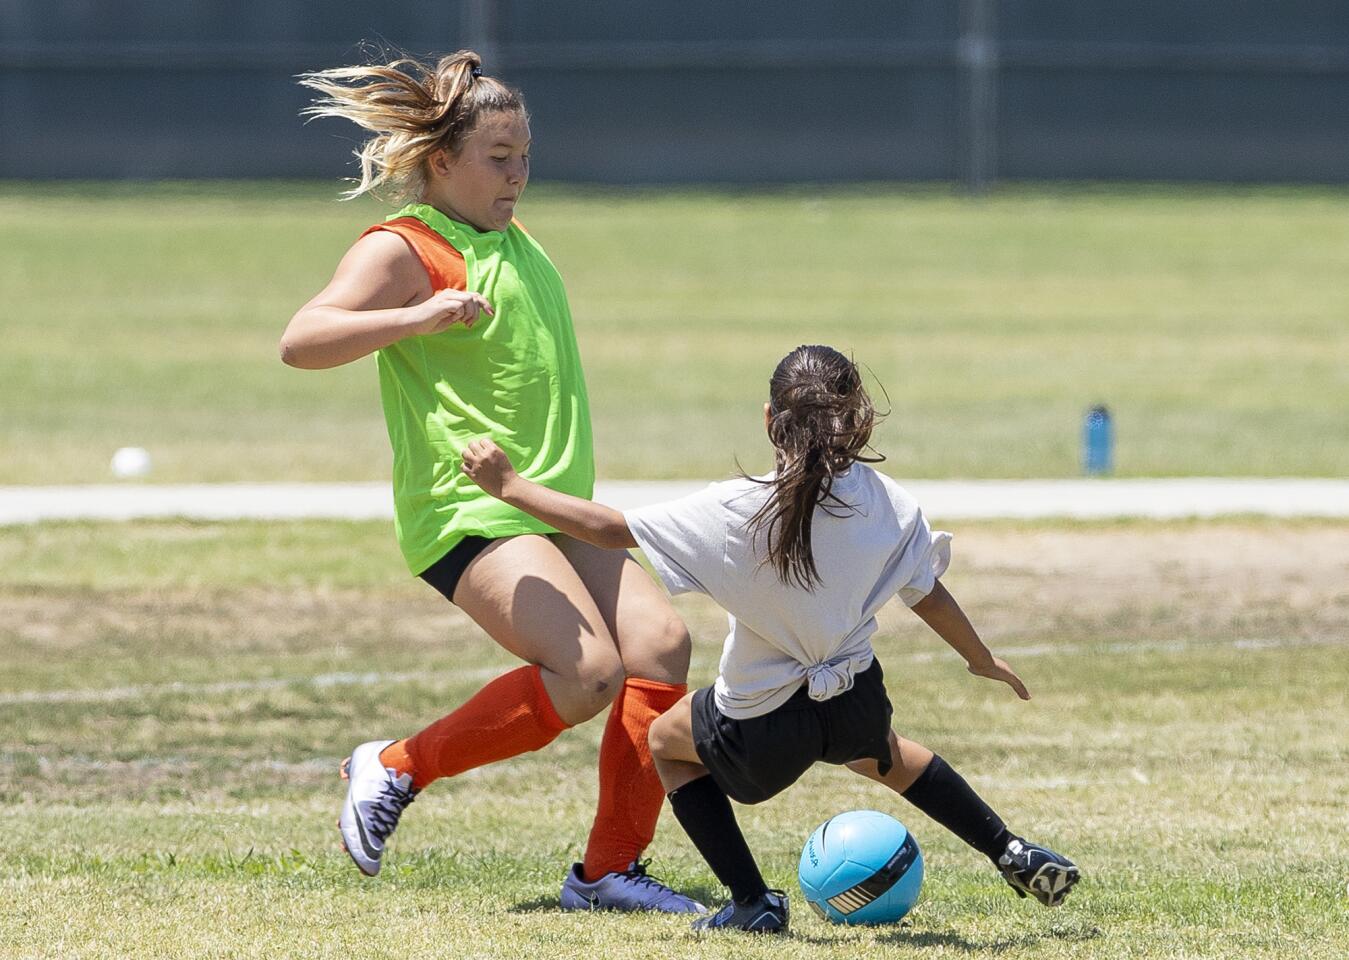 Photo Gallery: A girls' Bronze Division quarterfinal match at the Daily Pilot Cup